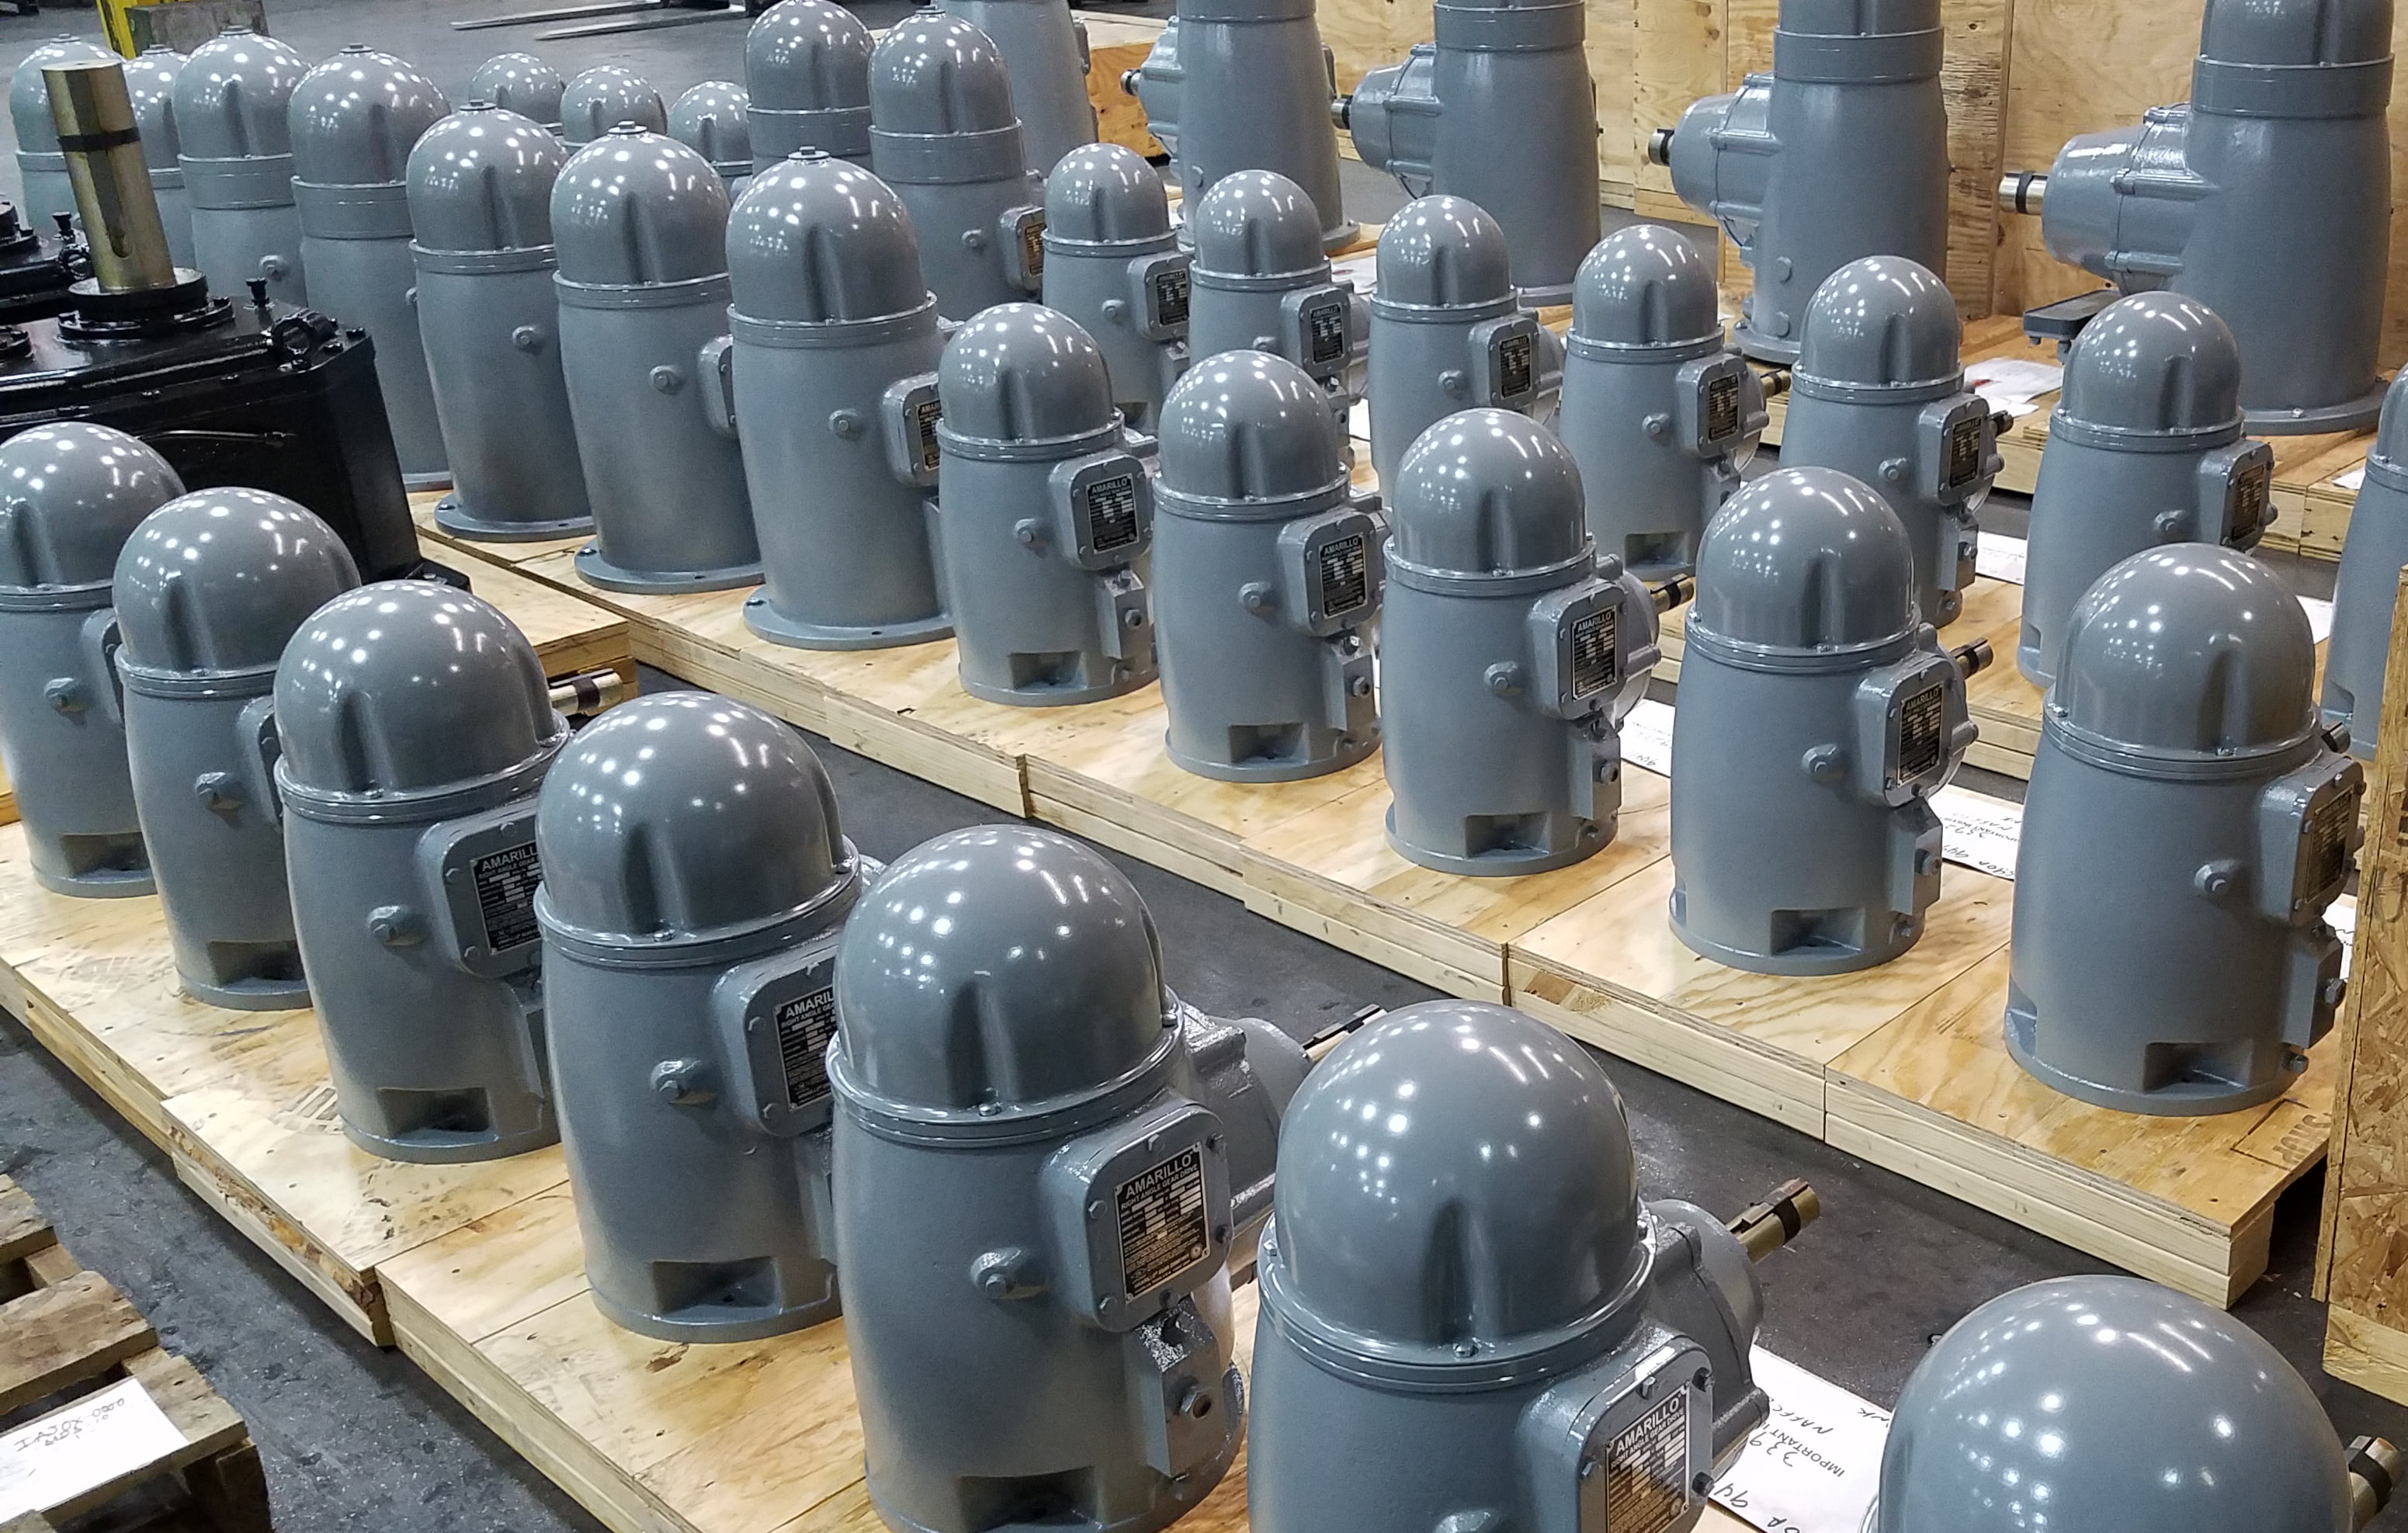 Right-Angle Pump Drives Prepared for Shipment